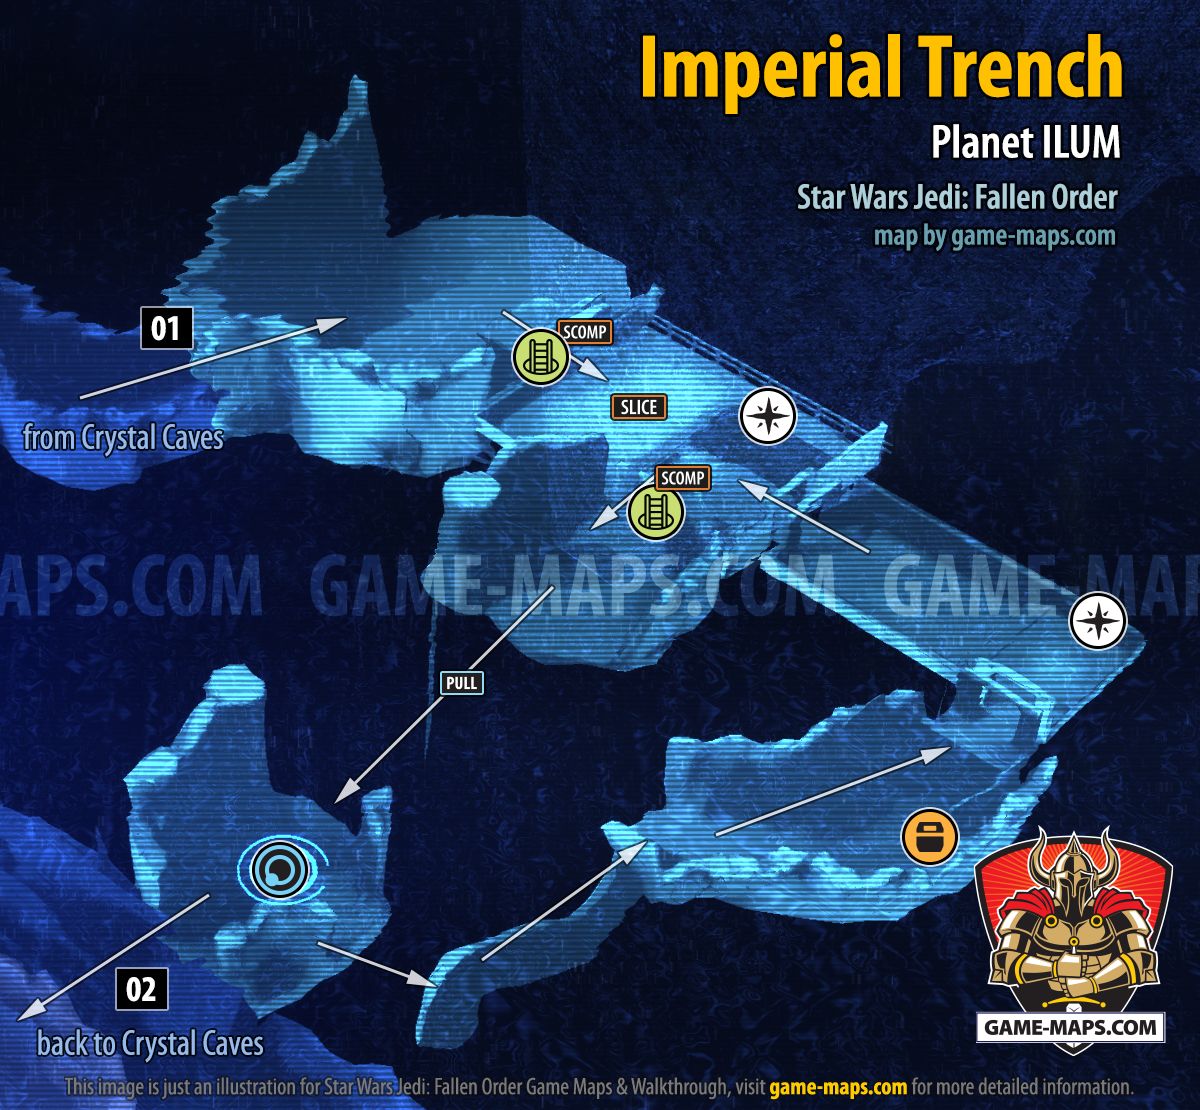 Imperial Trench Map, Planet Ilum for Star Wars Jedi Fallen Order